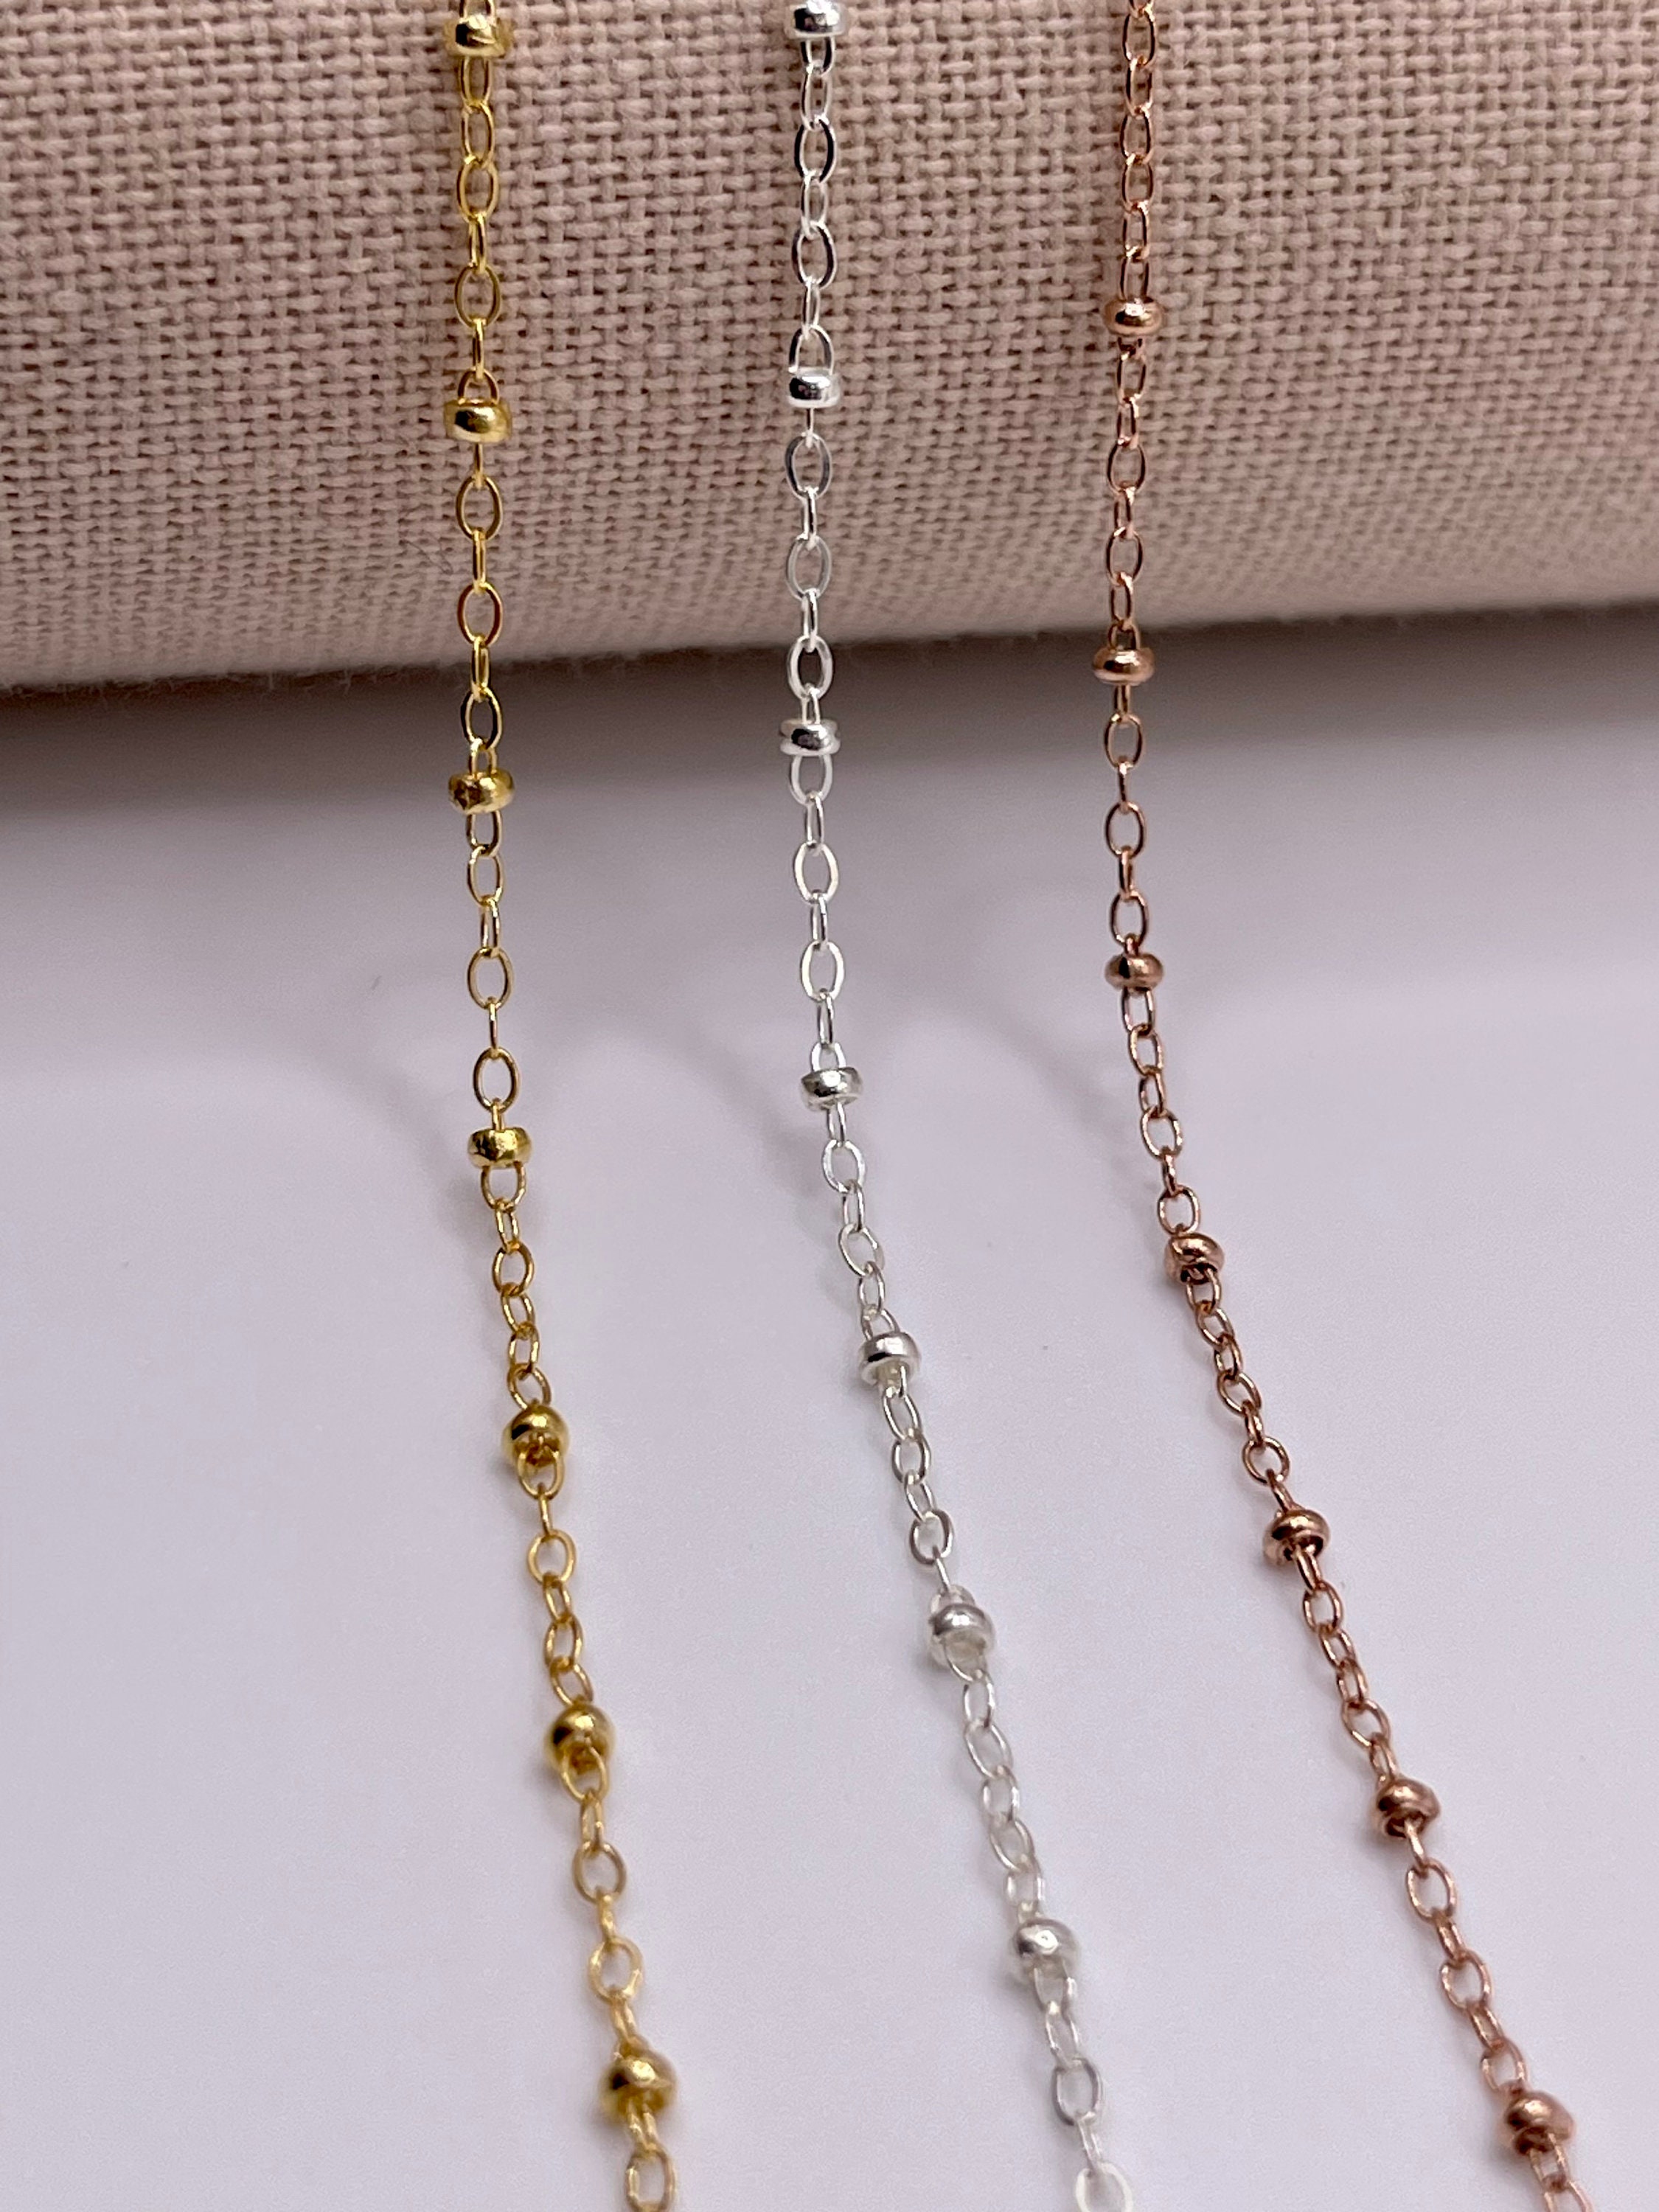 14K Gold Bead Chain Necklace, Mini Balls Necklace, Multi Balls Chain  Necklace, Minimalist Fashion Necklace, Delicate Modern, Gift for Her 